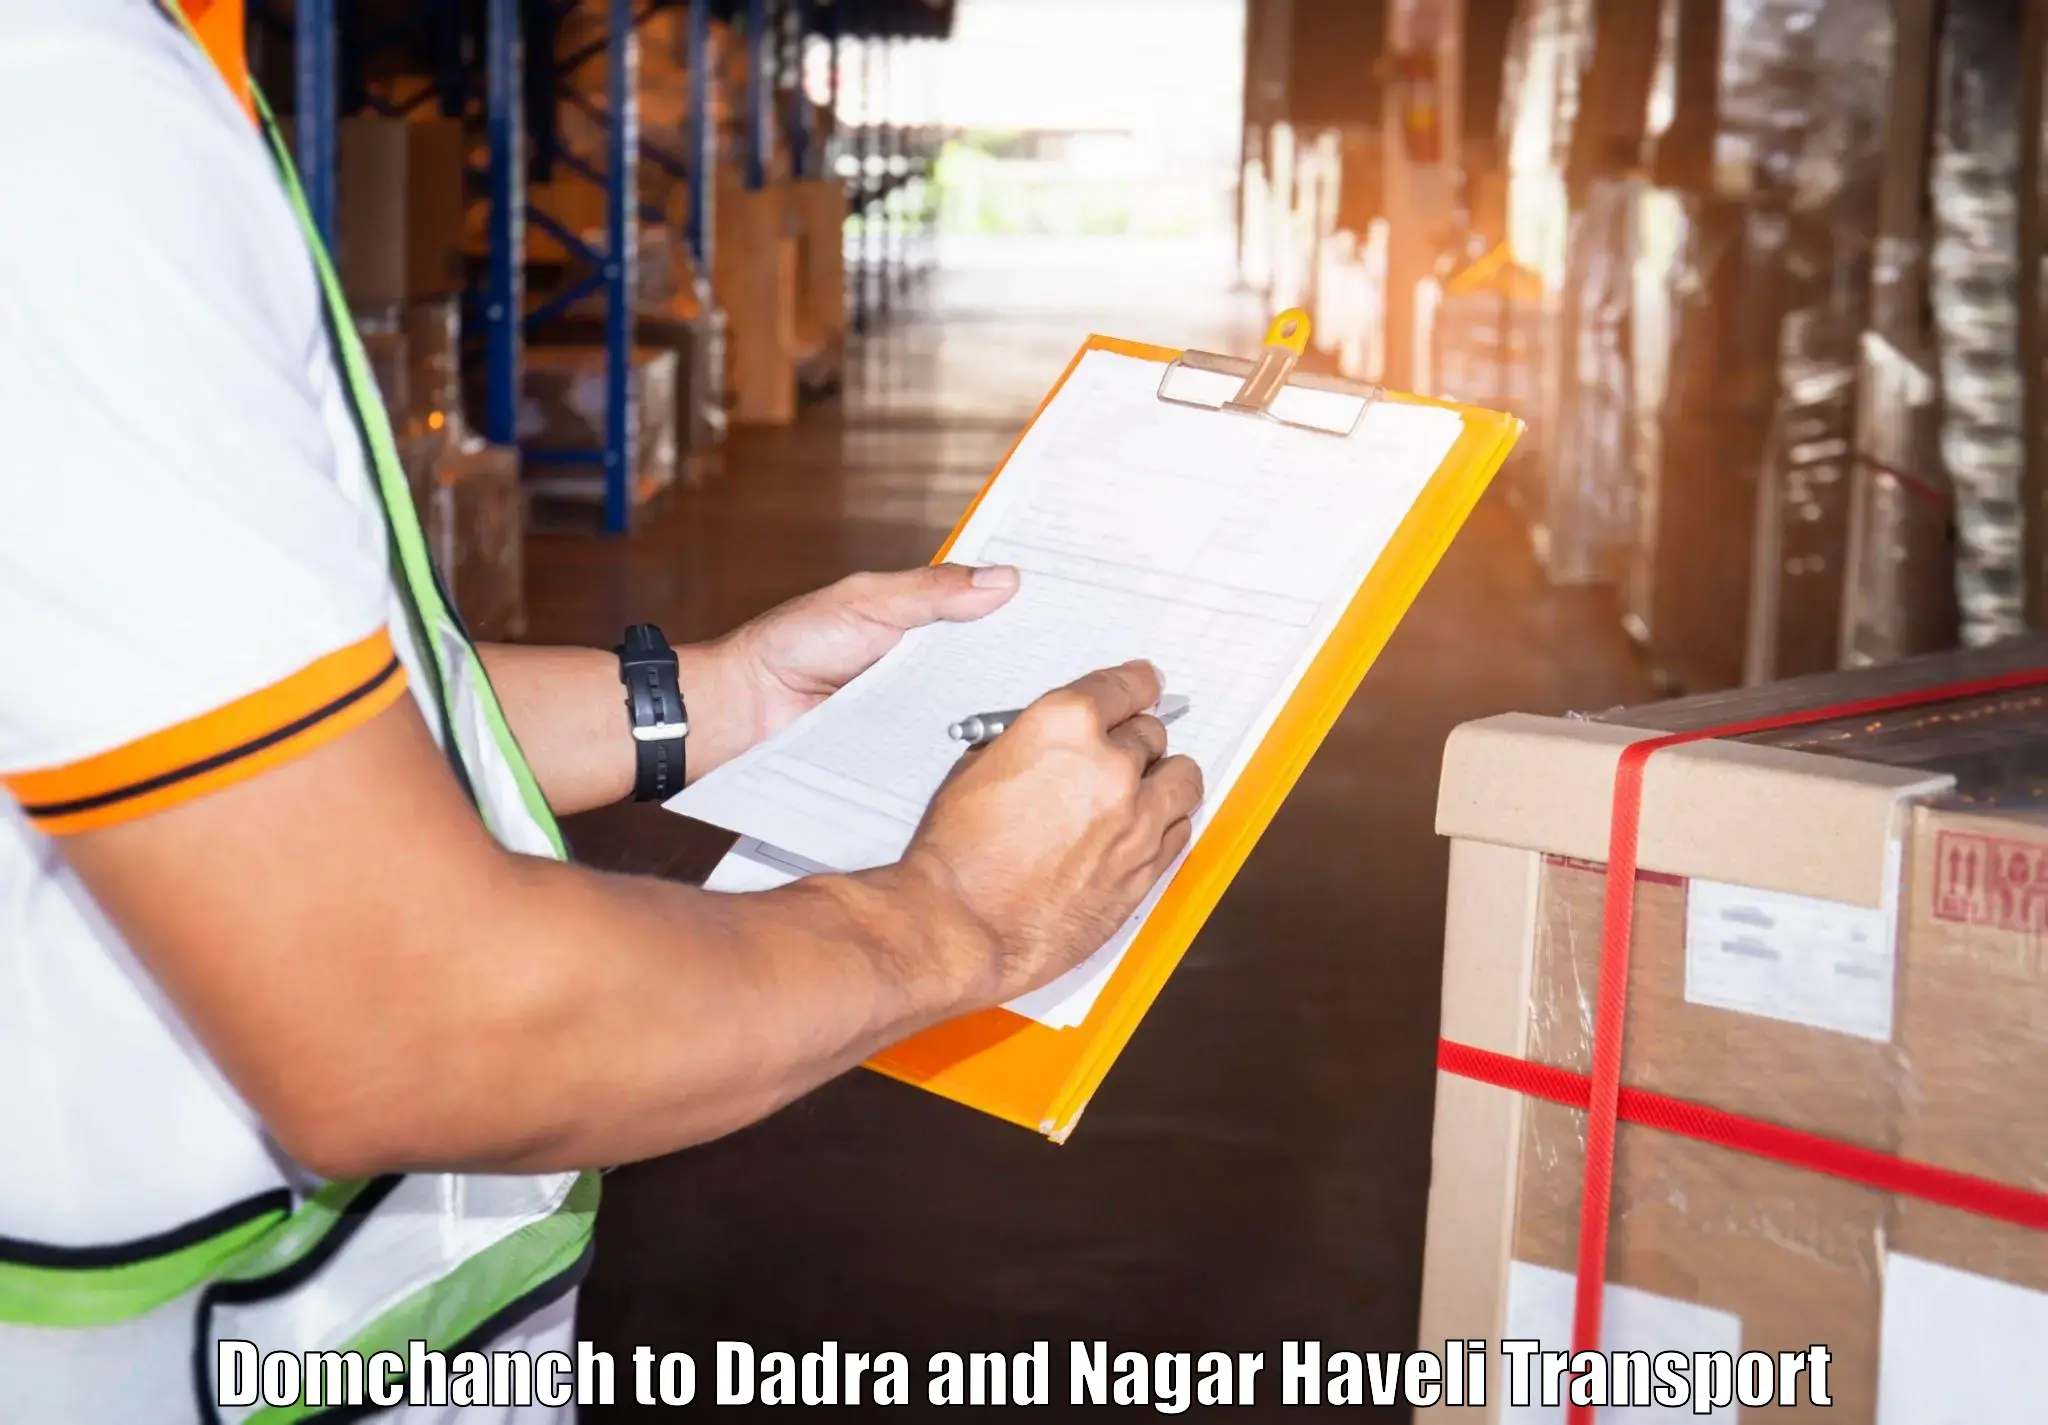 Delivery service Domchanch to Dadra and Nagar Haveli